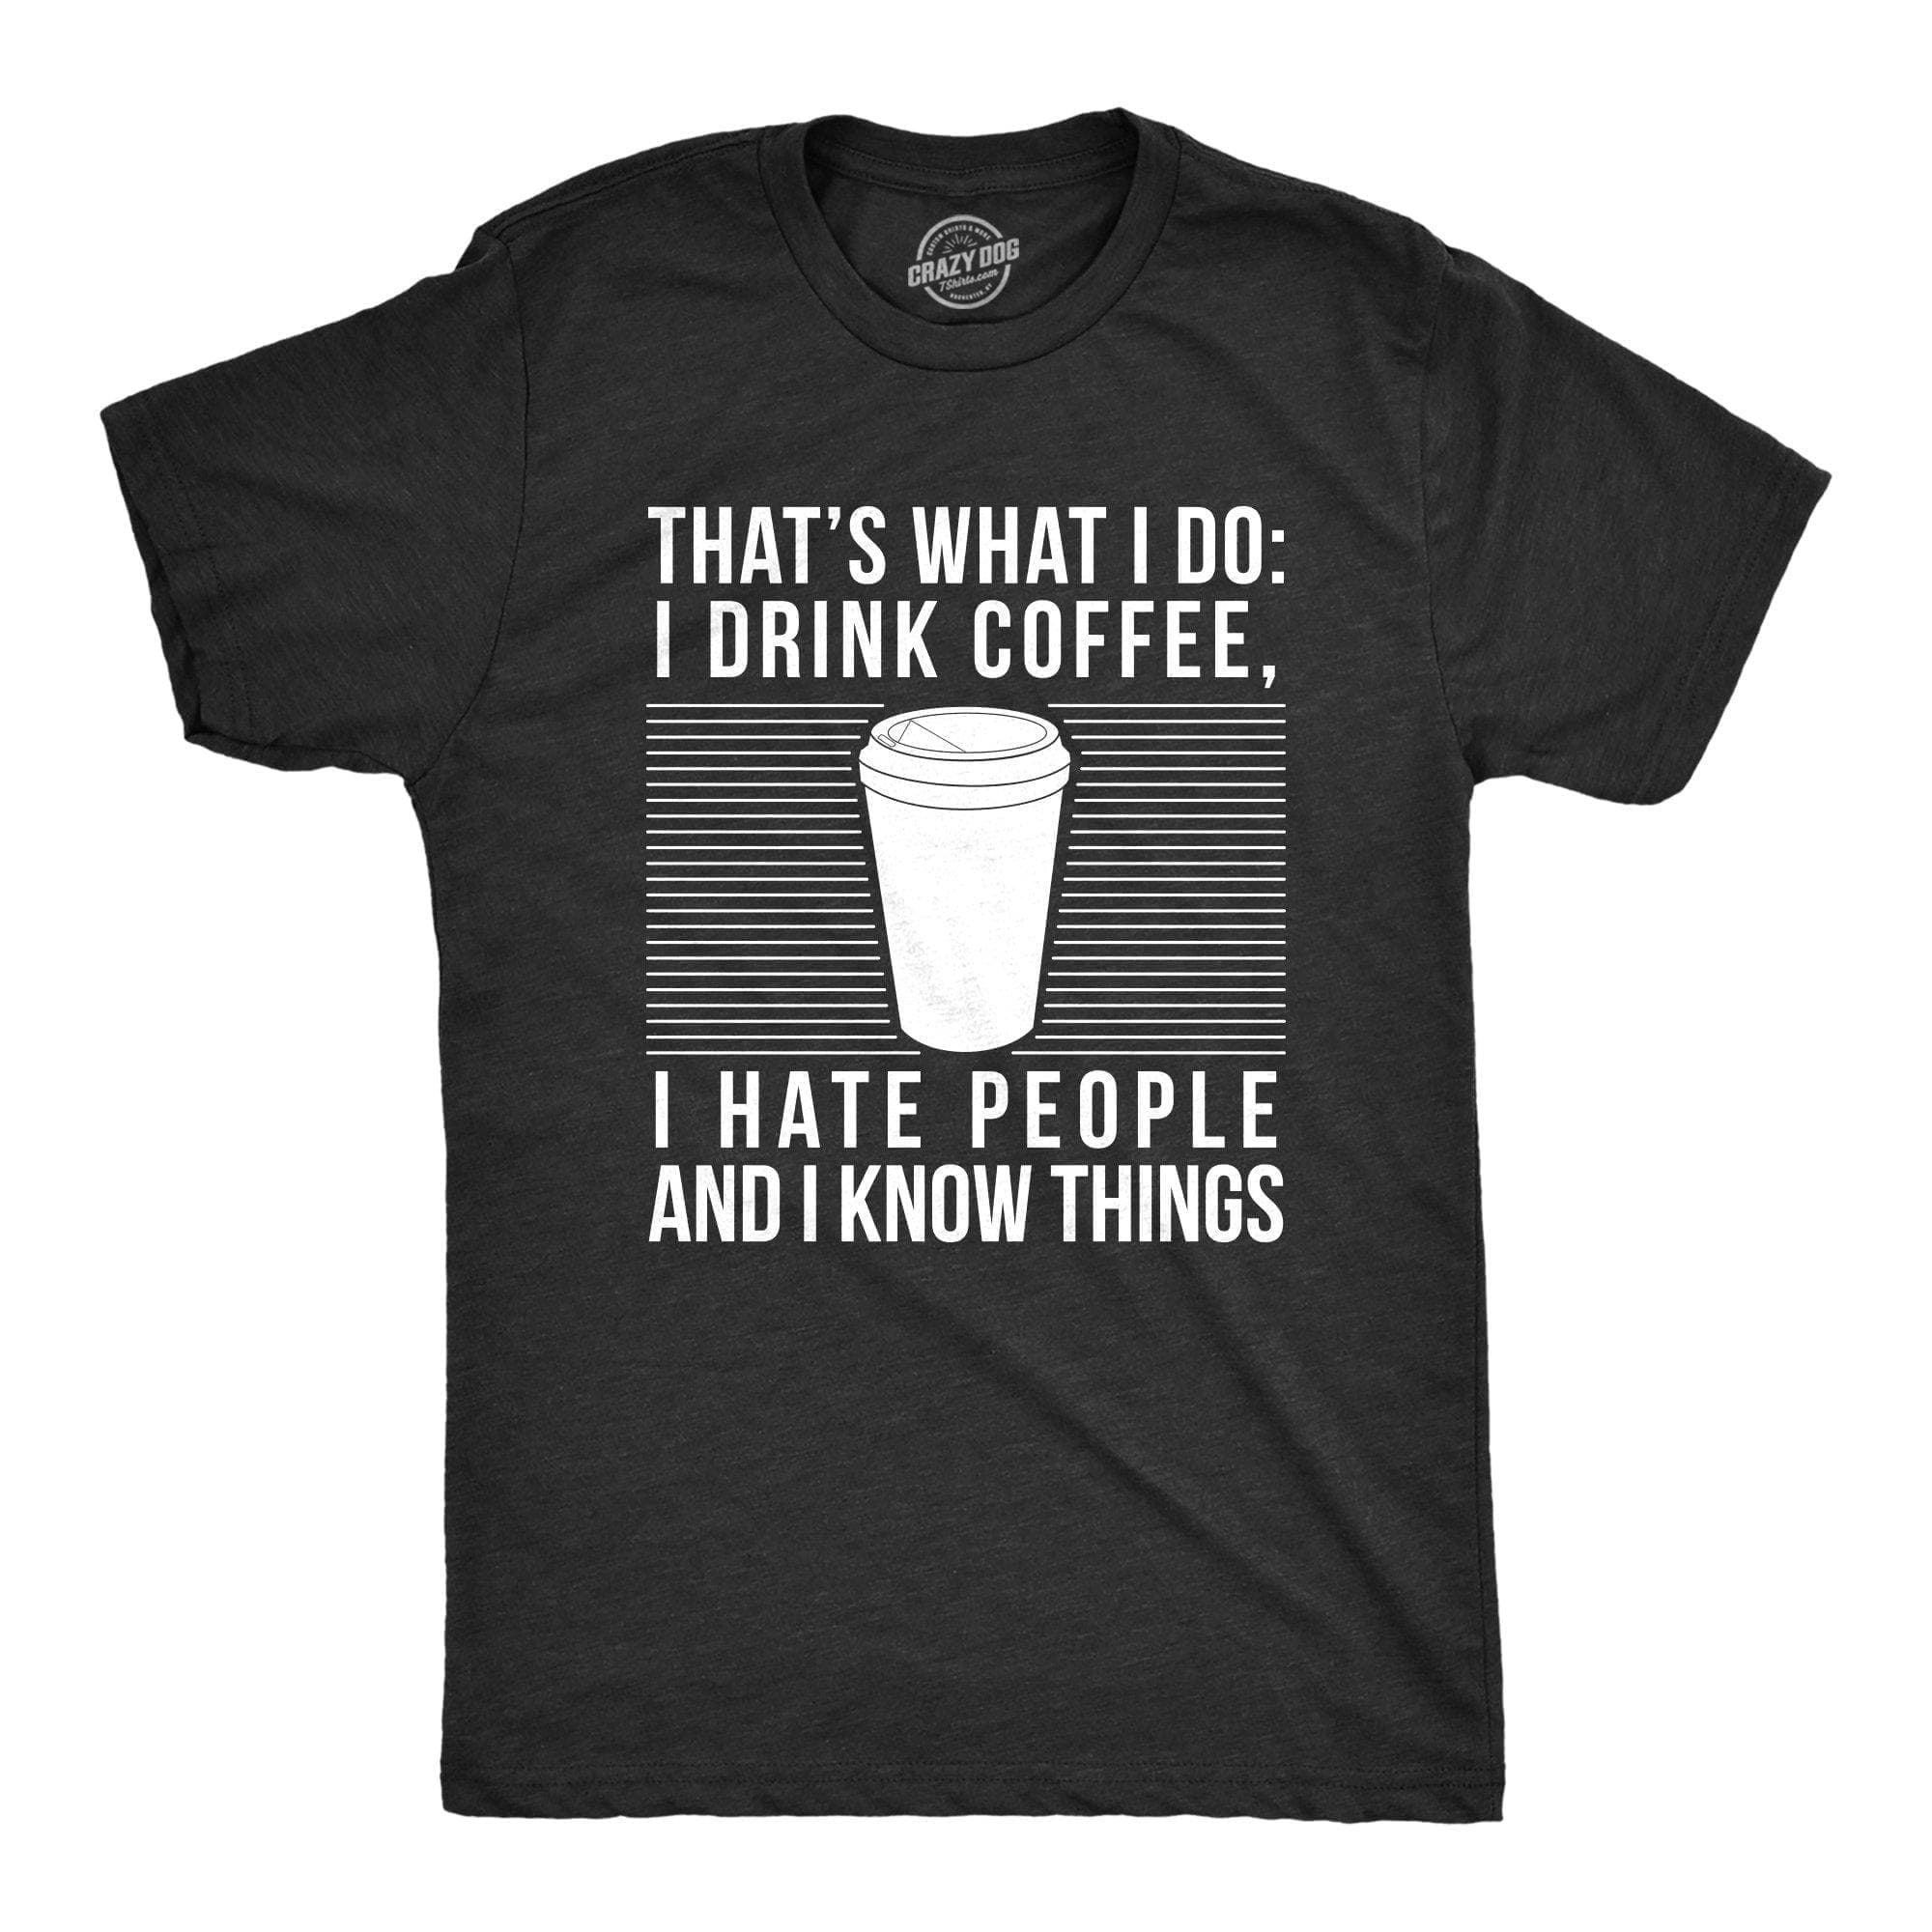 I Drink Coffee I Hate People And I Know Things Men's Tshirt - Crazy Dog T-Shirts